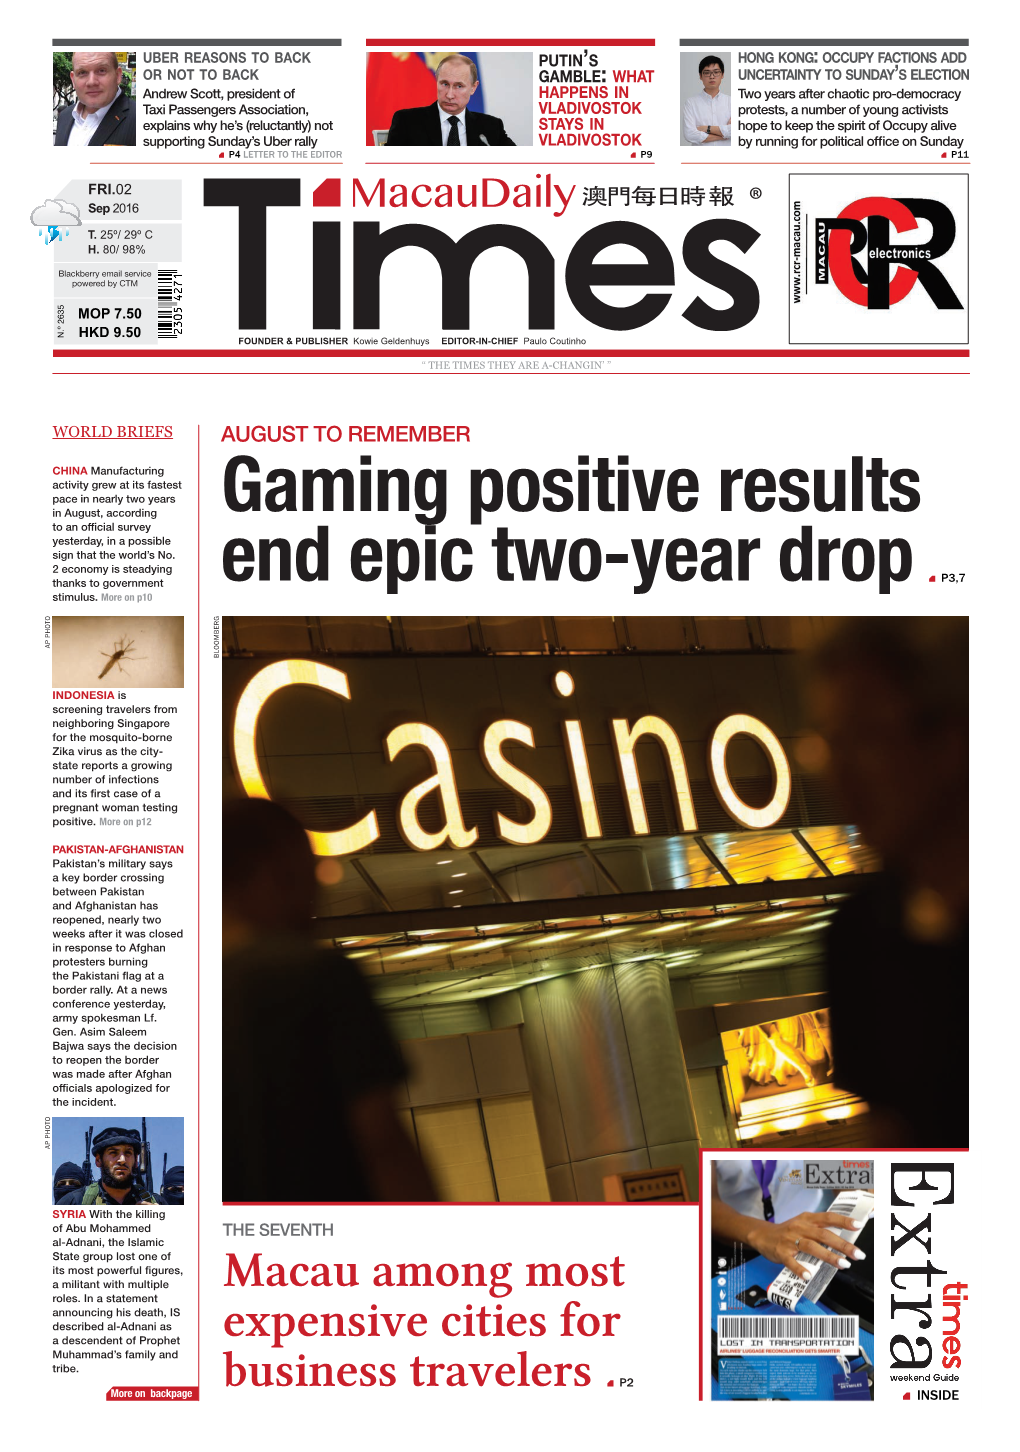 Gaming Positive Results End Epic Two-Year Drop